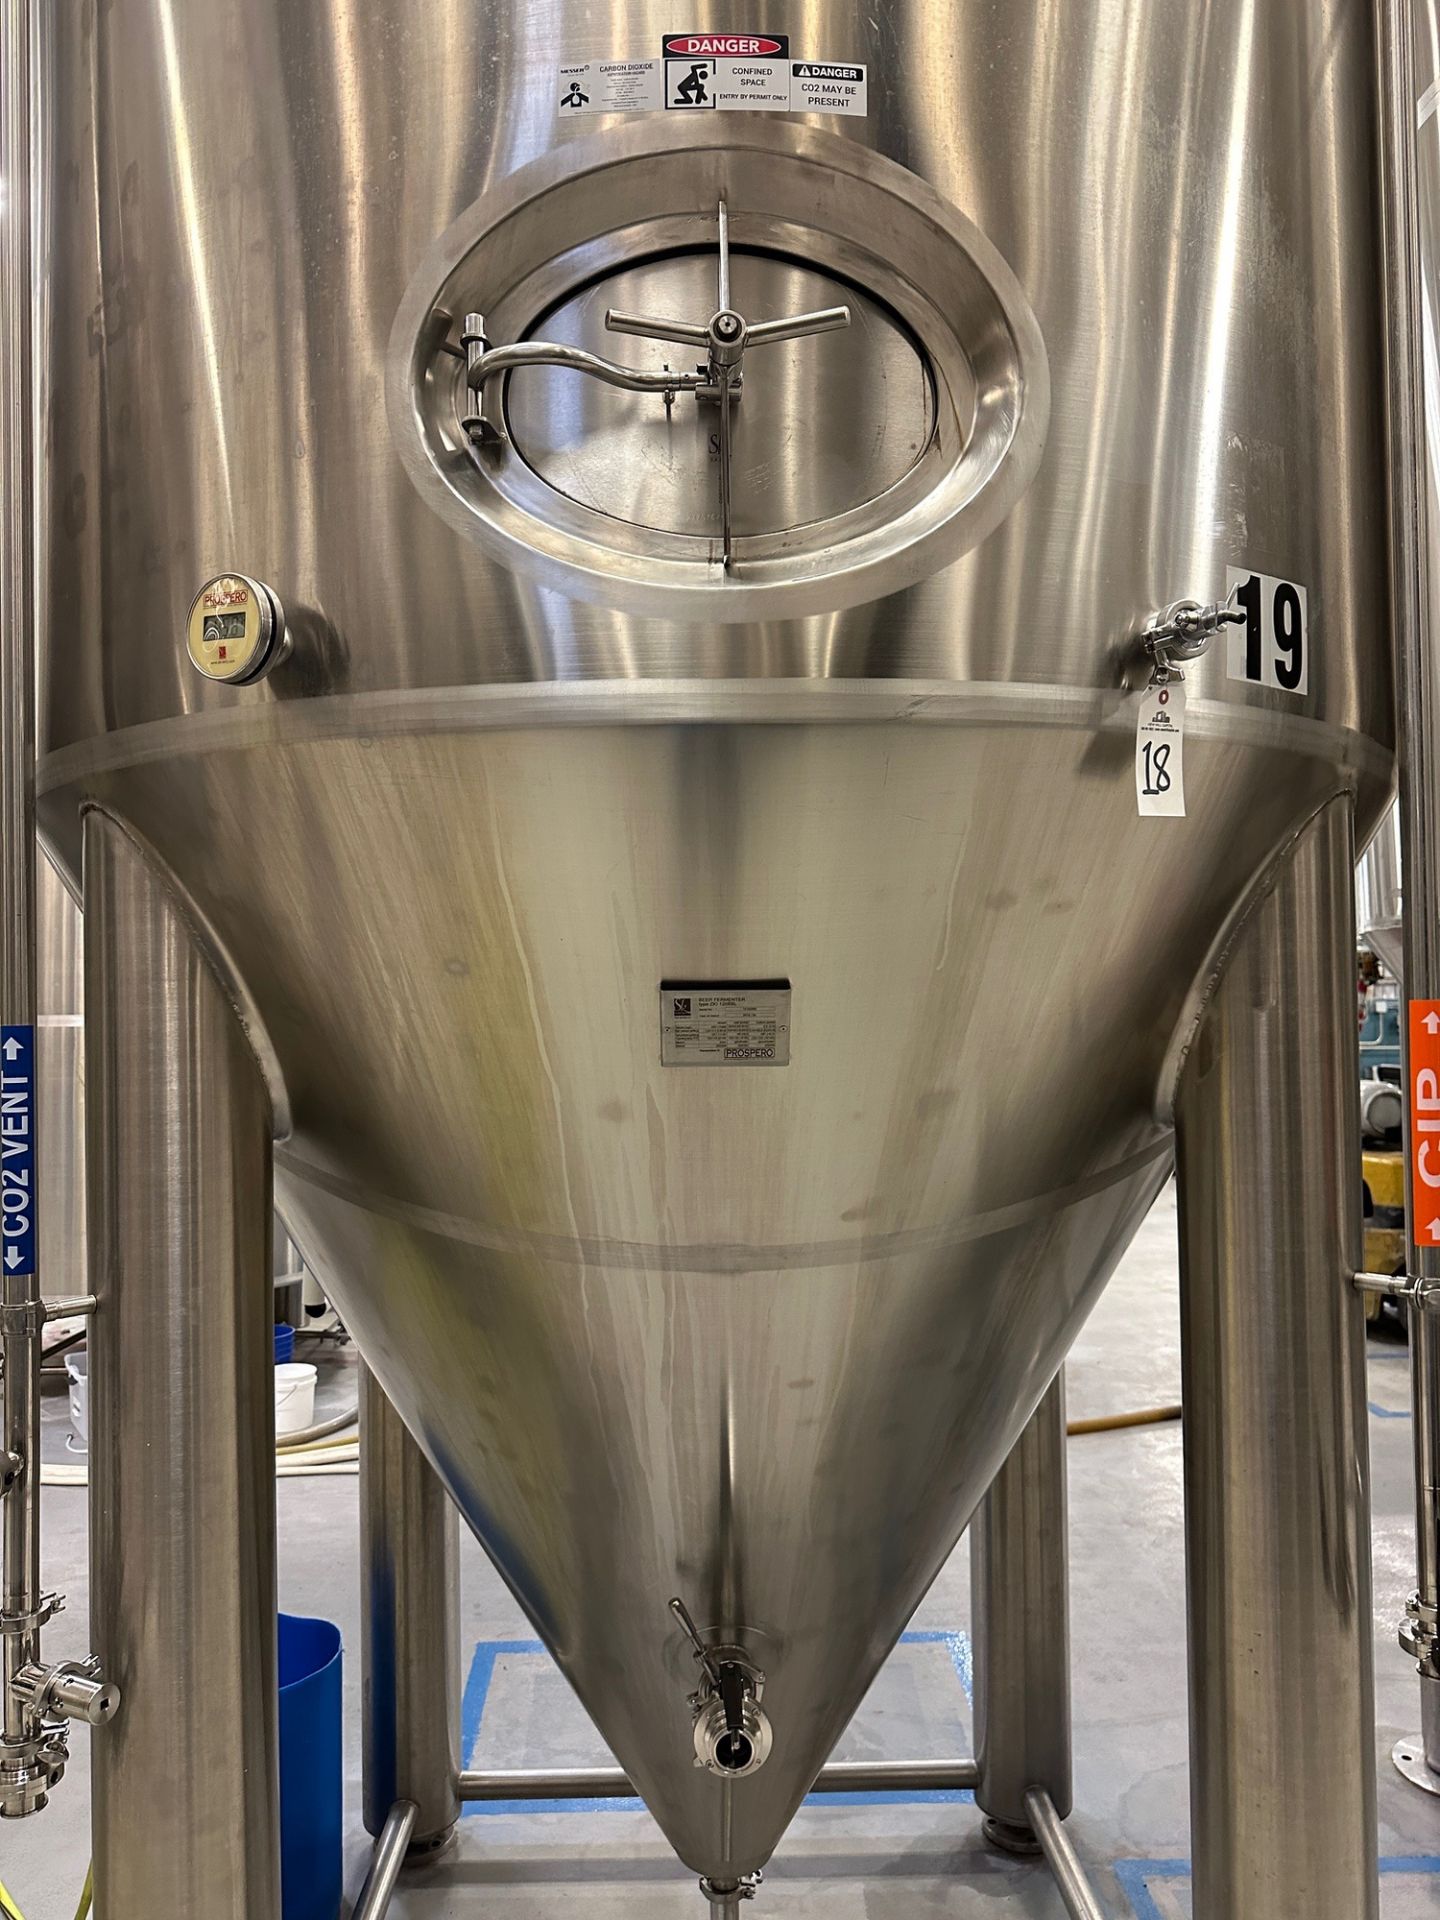 (1 of 2) 2018 Prospero 120 BBL FV / 148.6 BBL or 4,600 Gal Max Capacity Jacketed Stainless Steel FV - Image 2 of 4